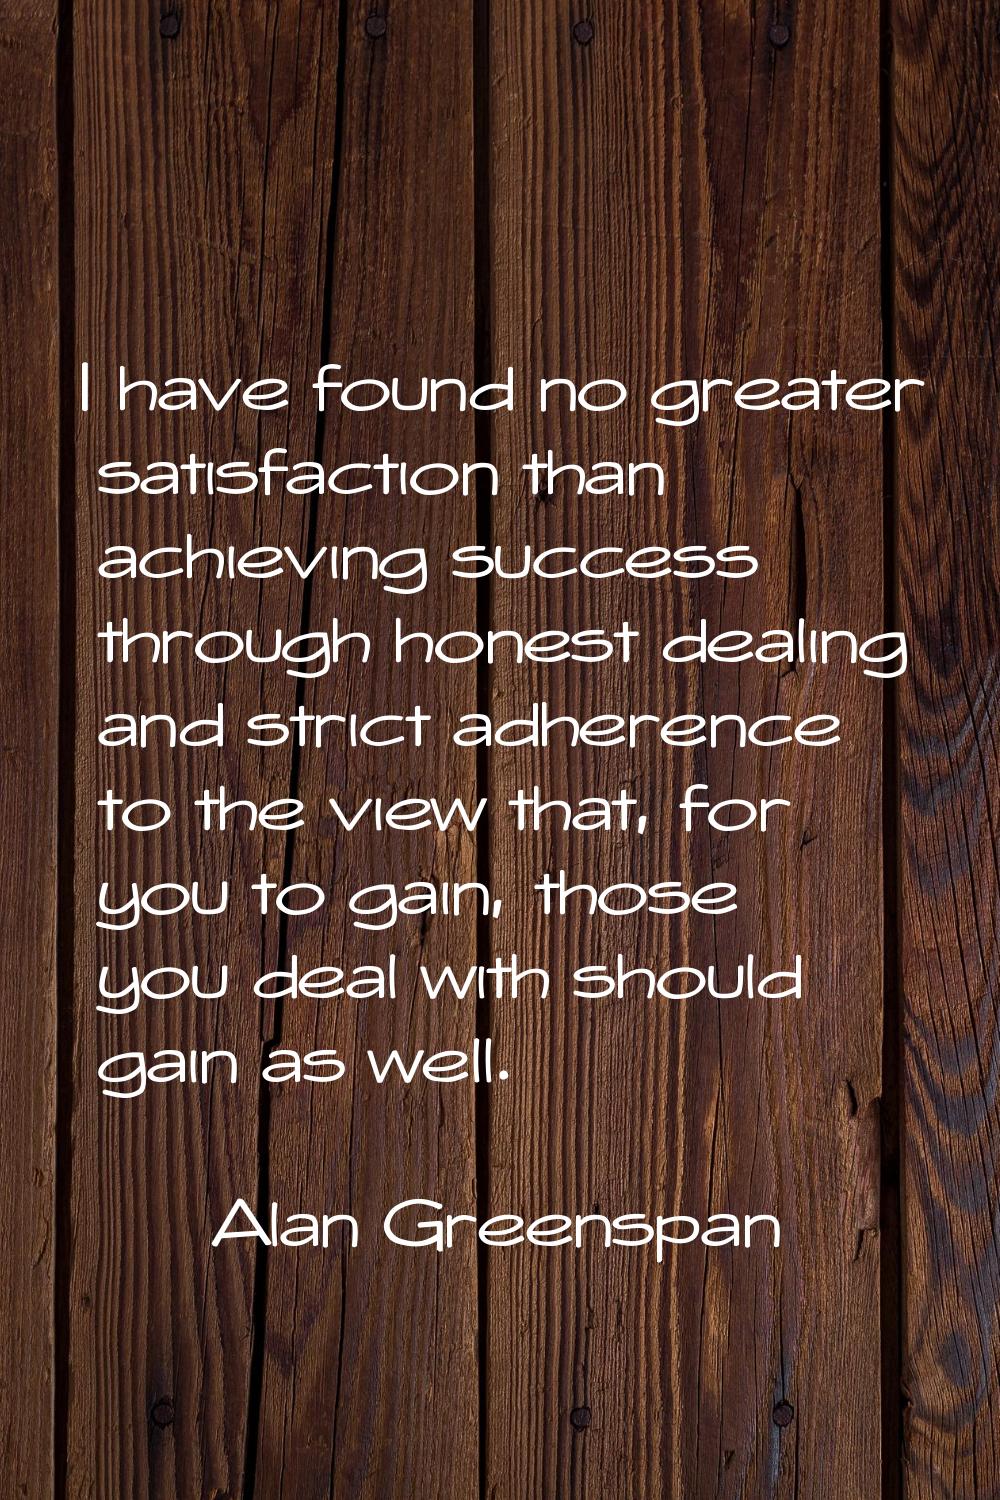 I have found no greater satisfaction than achieving success through honest dealing and strict adher